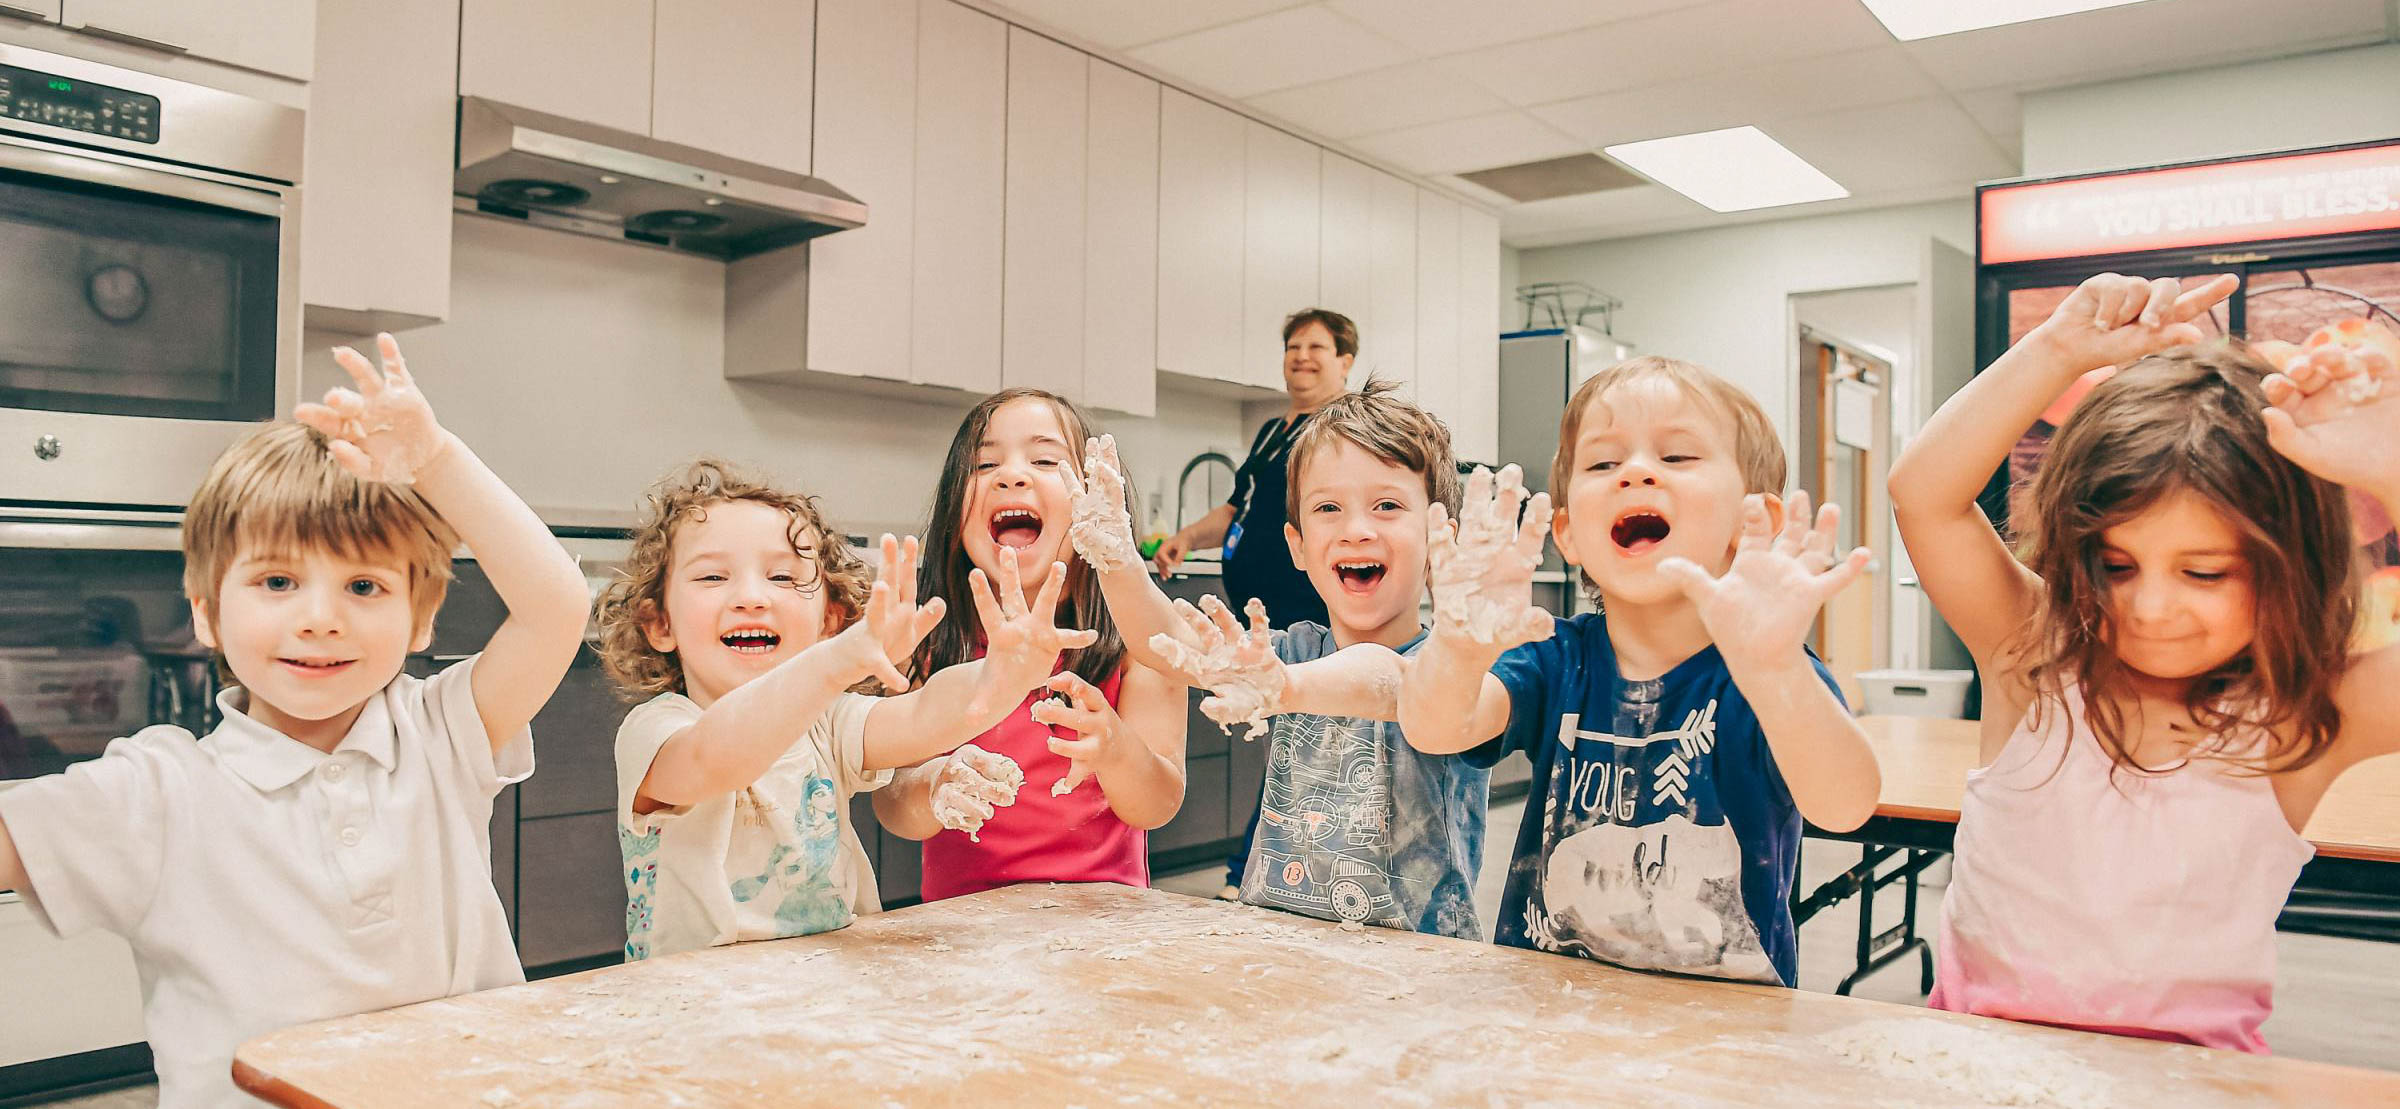 A group of kids in a kitchen.